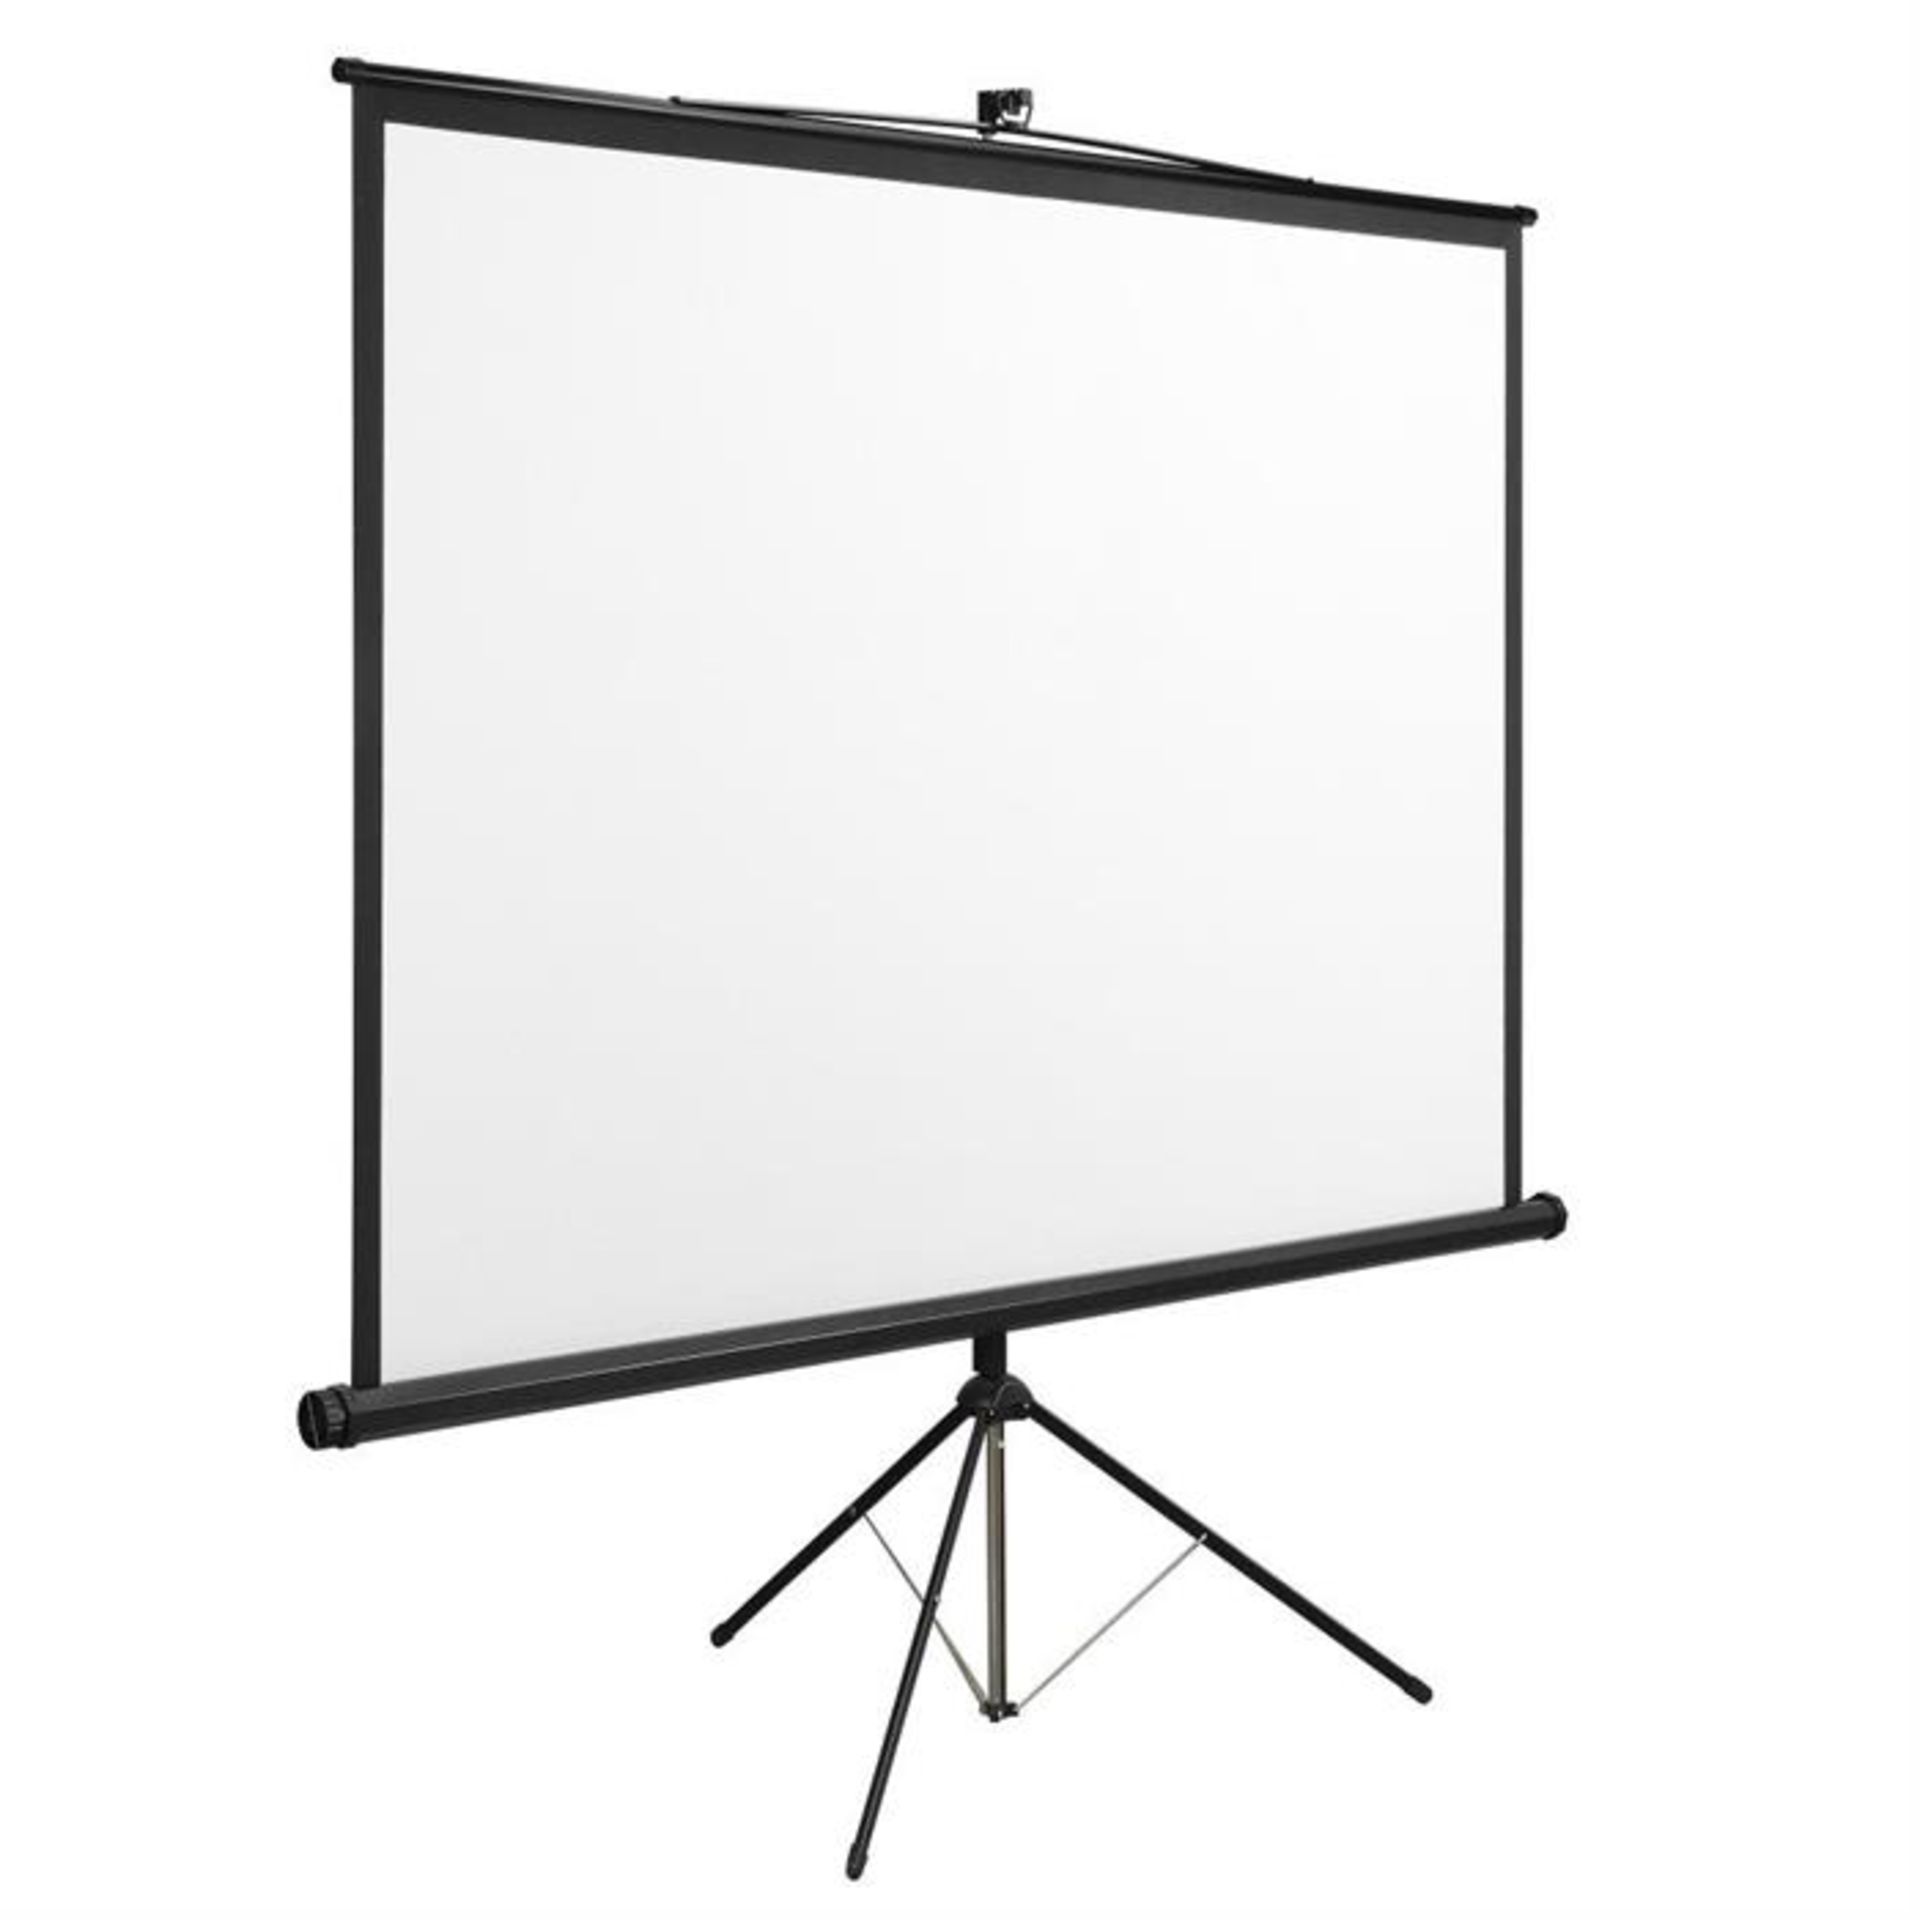 67" Tri-pod projector screen (1-1). Boxed. Please note by Bidding on this item you agree to the